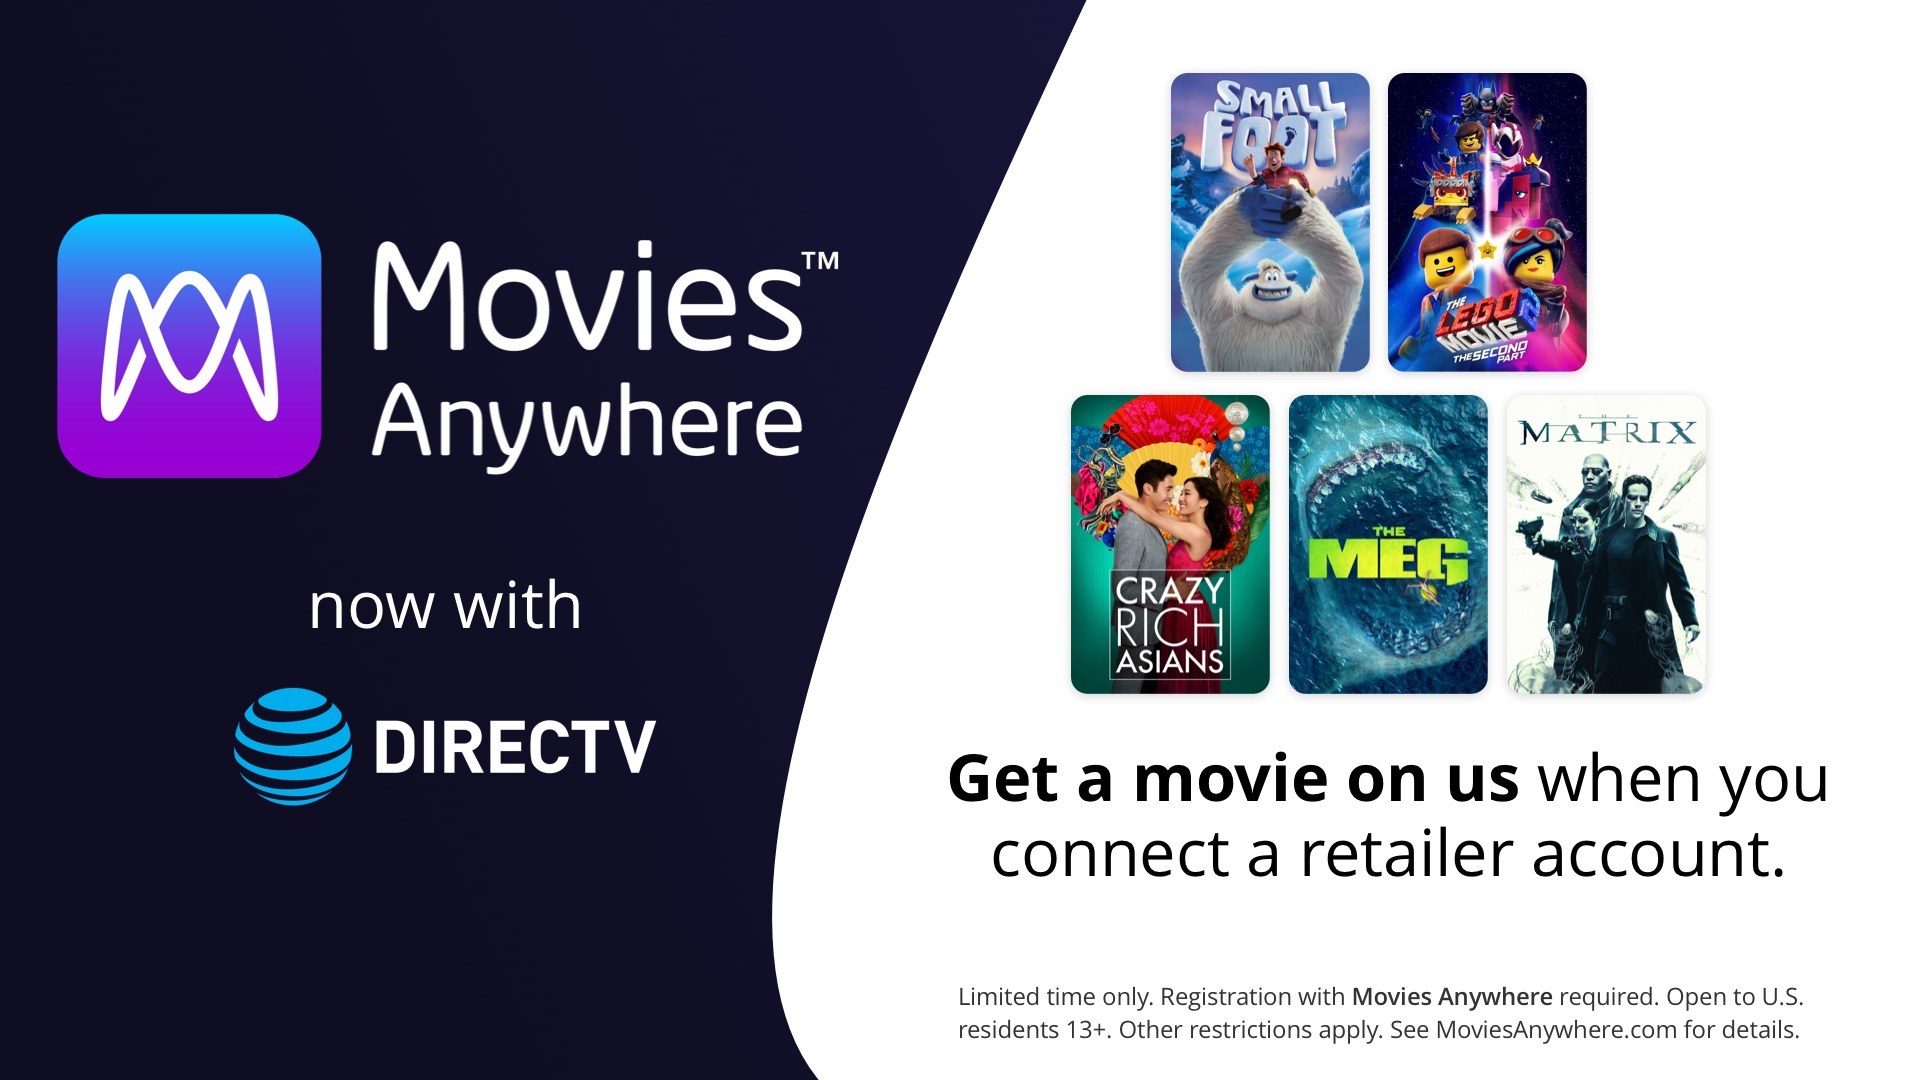 Movies Anywhere Announces DirecTV Launch and Free Movie Offer